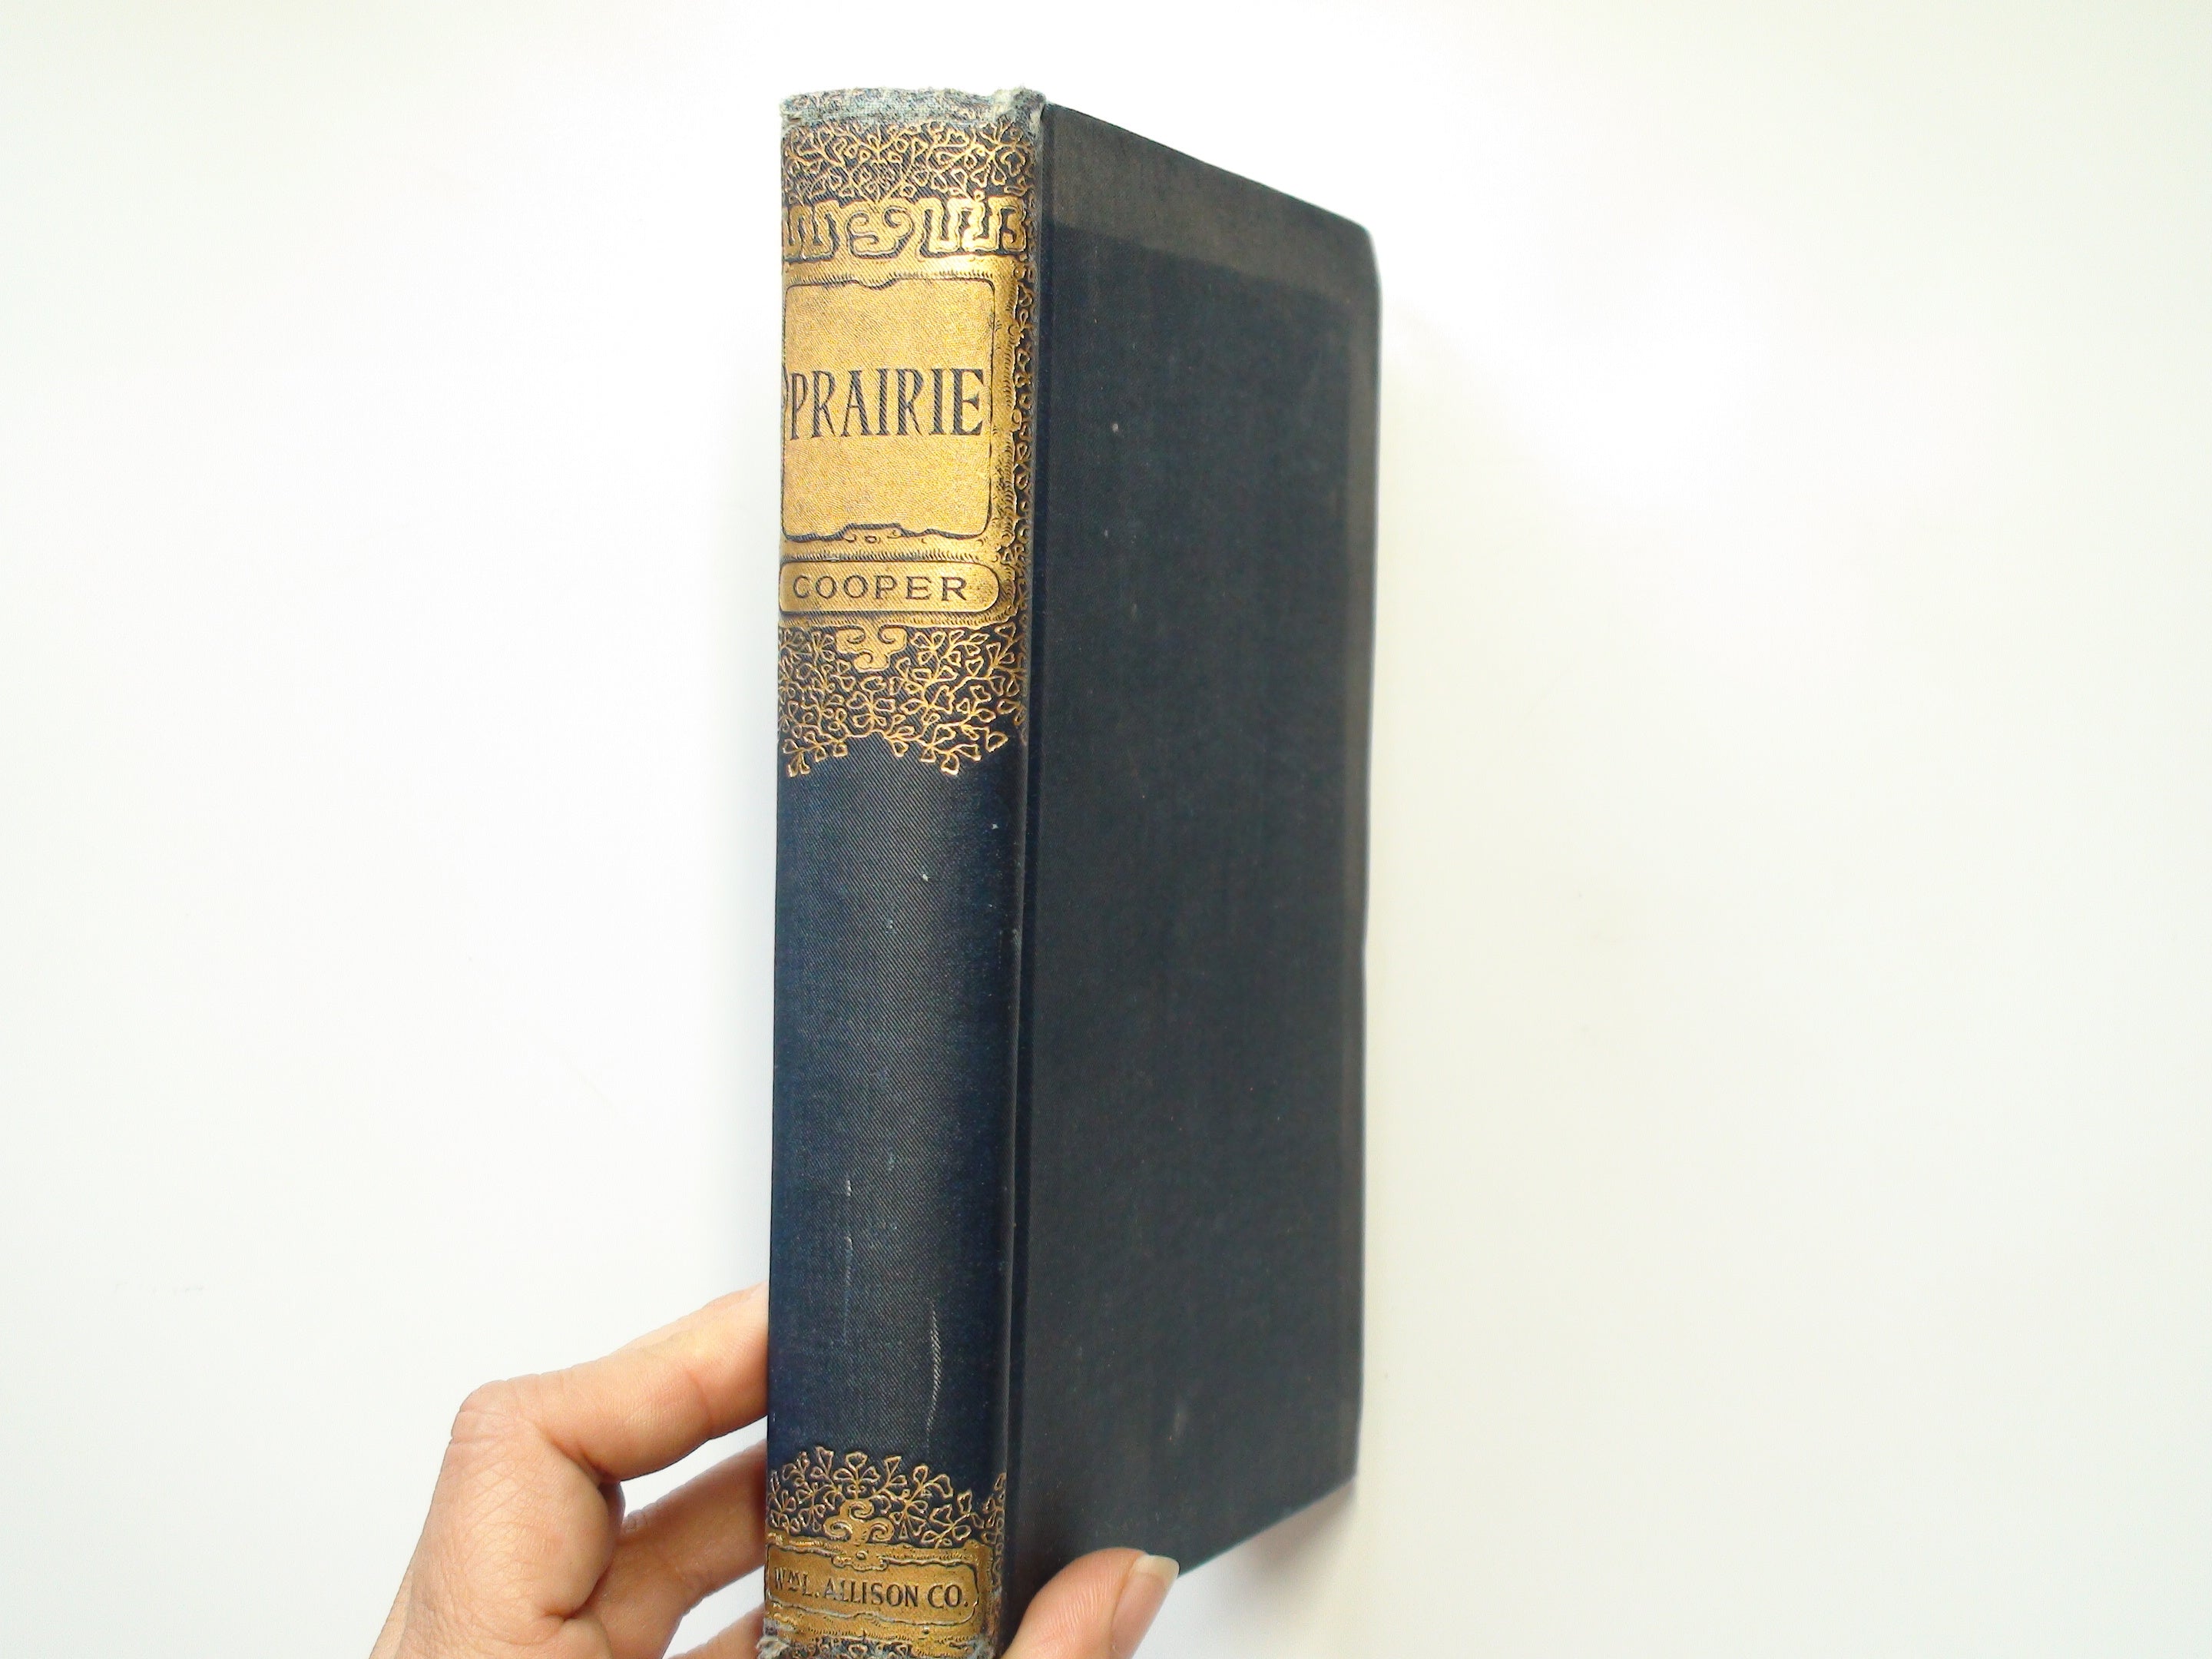 The Prairie, A Tale, by J. Fenimore Cooper, 1889